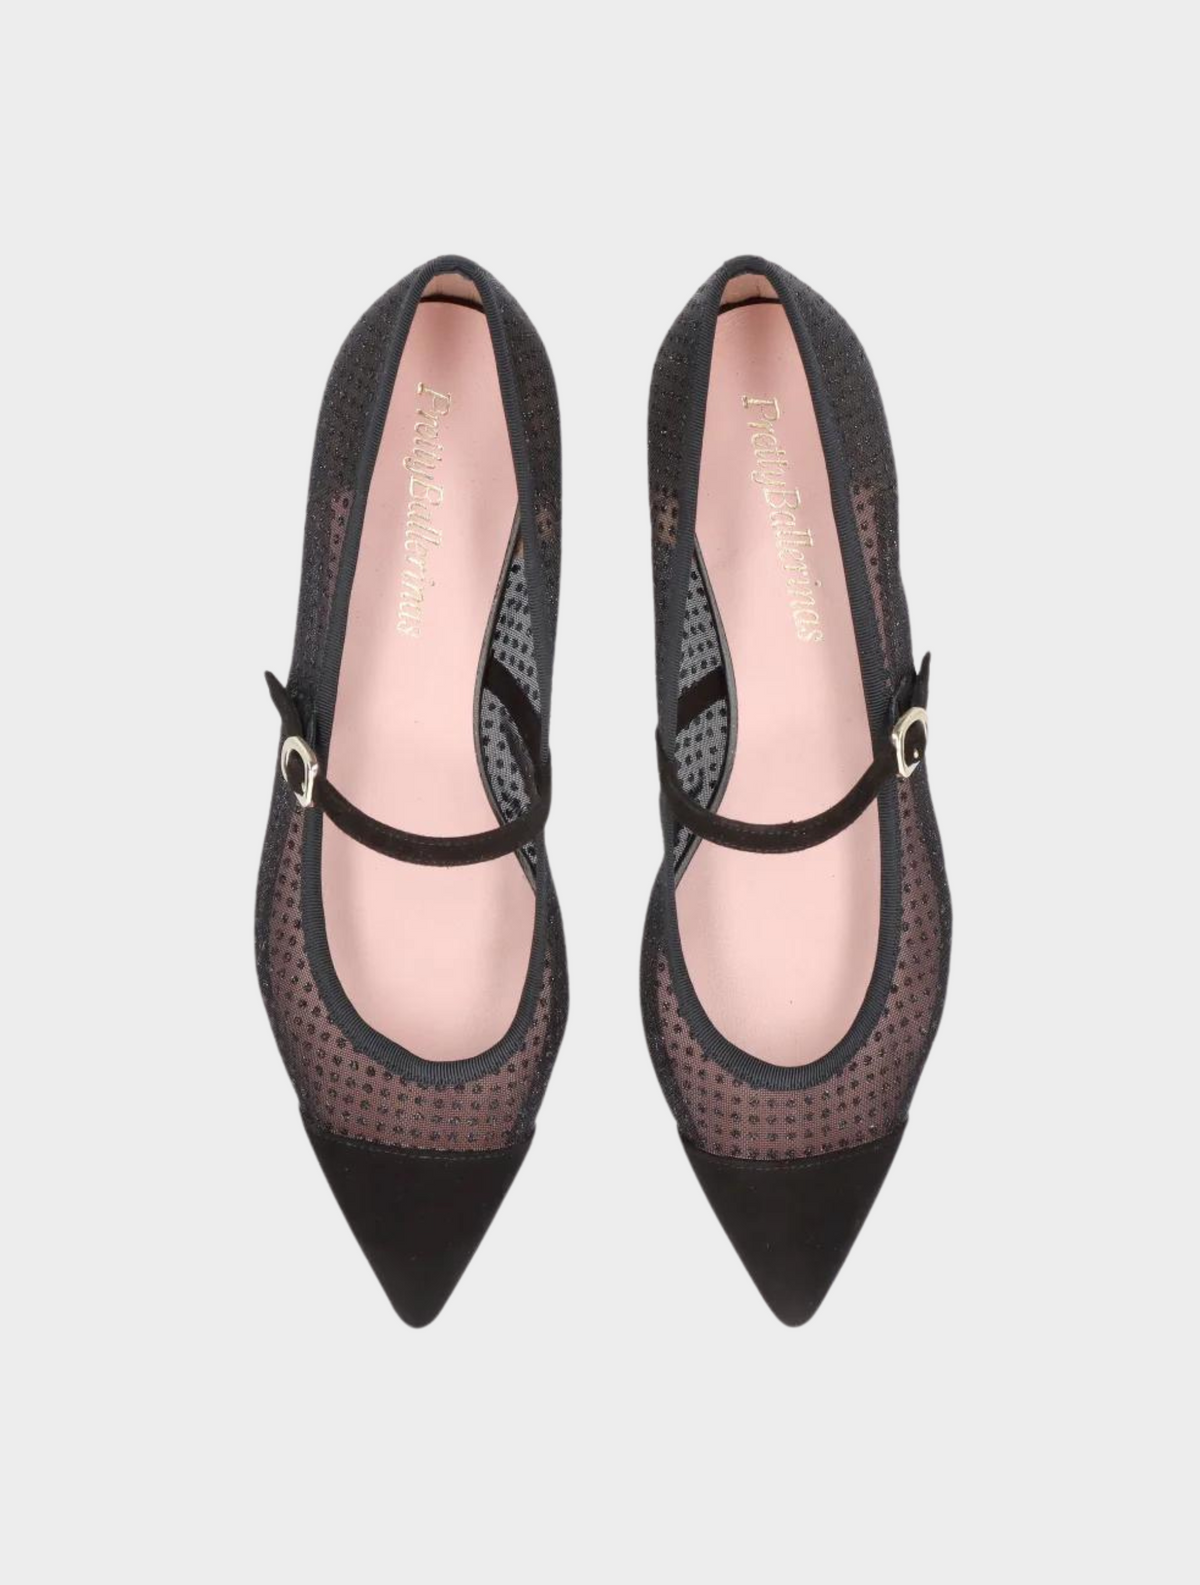 Mesh black ballet pumps with pointed toe and glitter black spots with a velvet toe and velvet strap across the arch of the foot